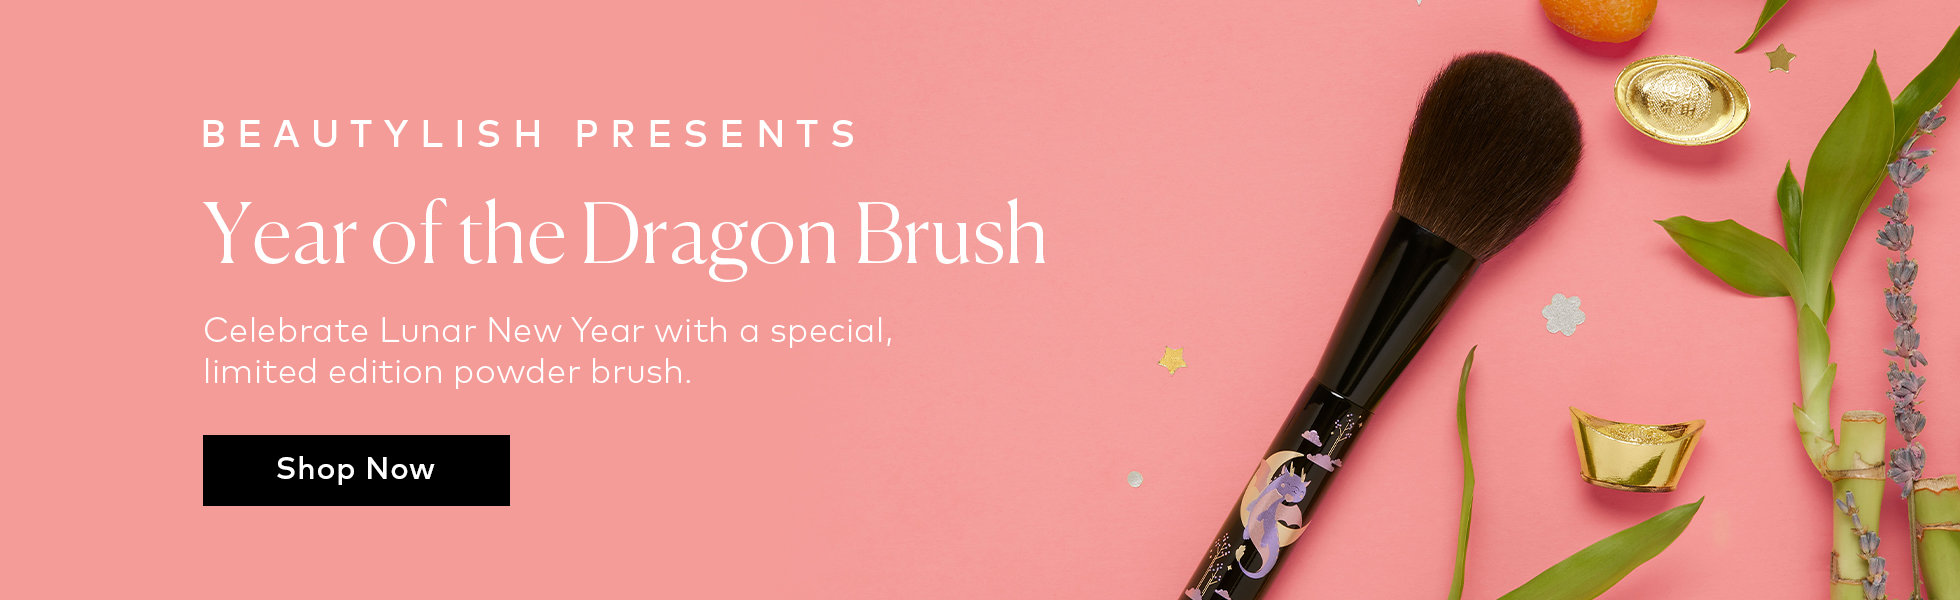 Shop the Lunar New Year Year of the Dragon brush now at Beautylish.com